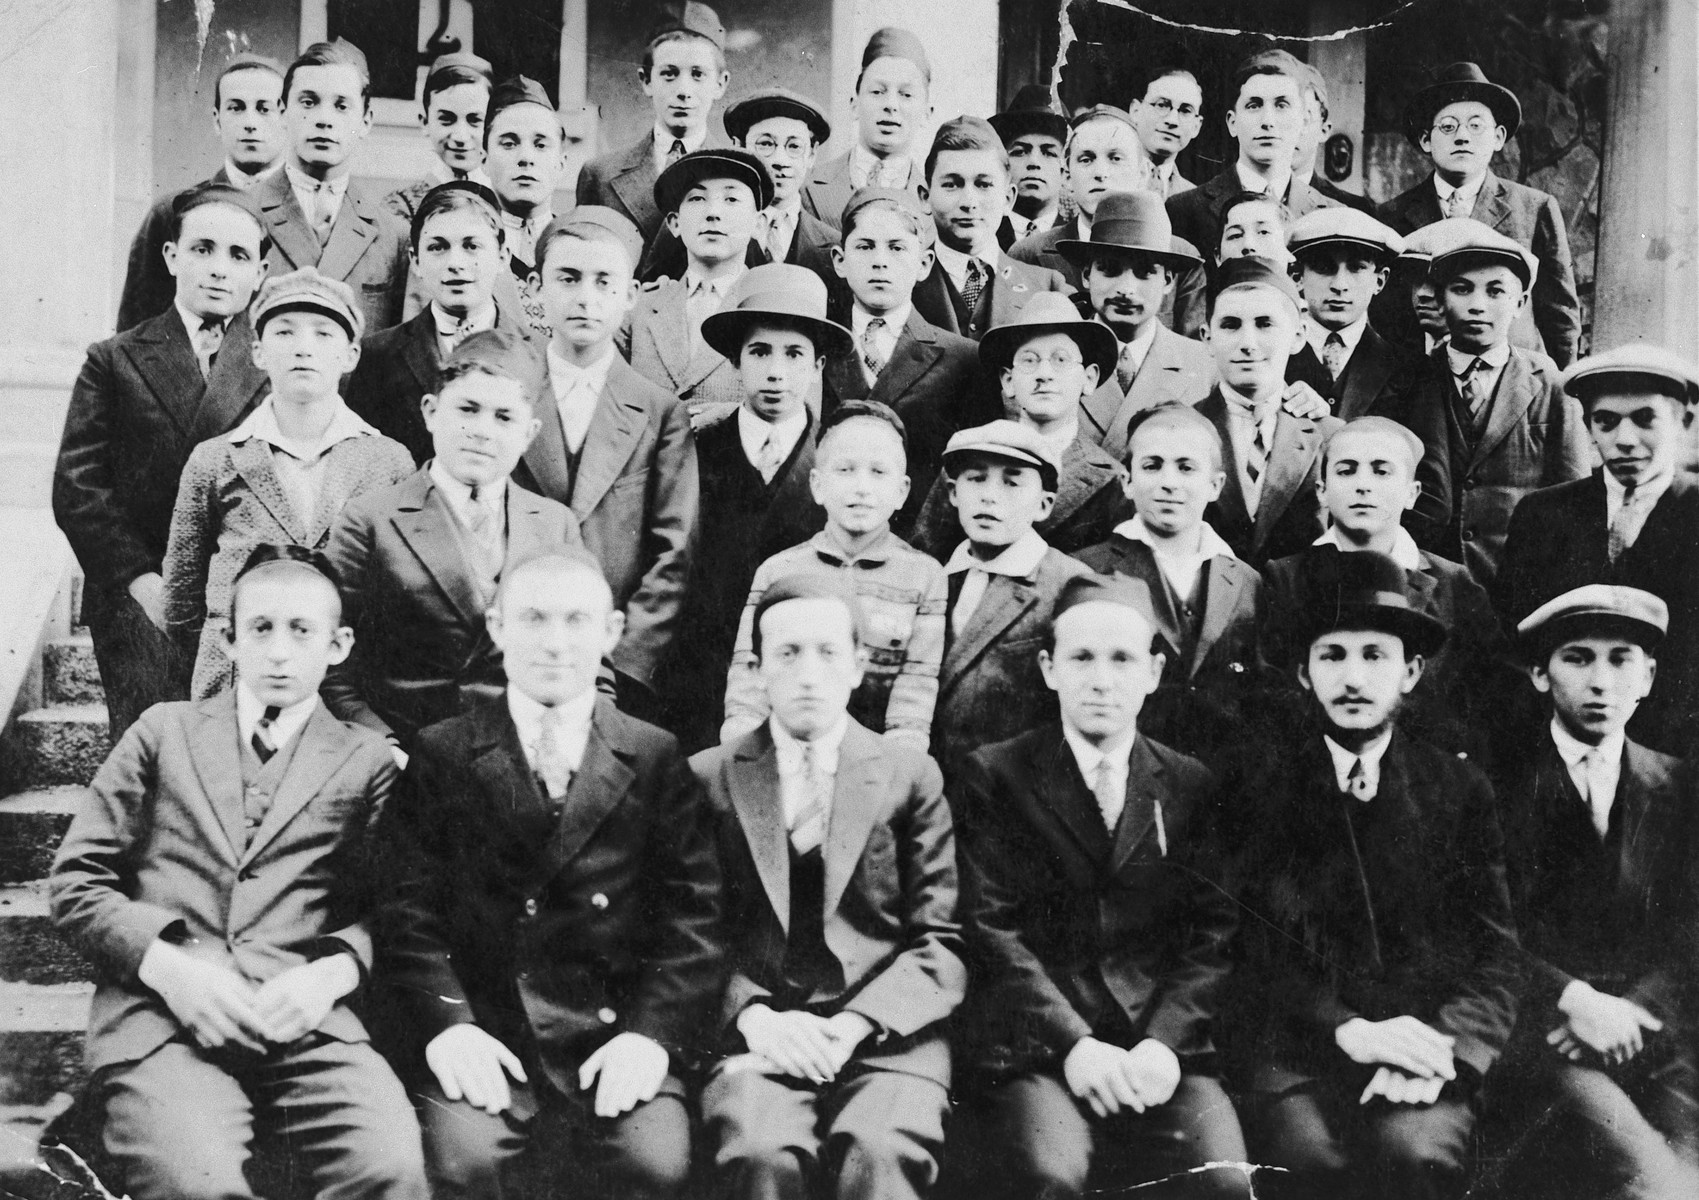 Group portrait of students in a Hungarian yeshiva.

Pictured in the top row is Josif Frankel.